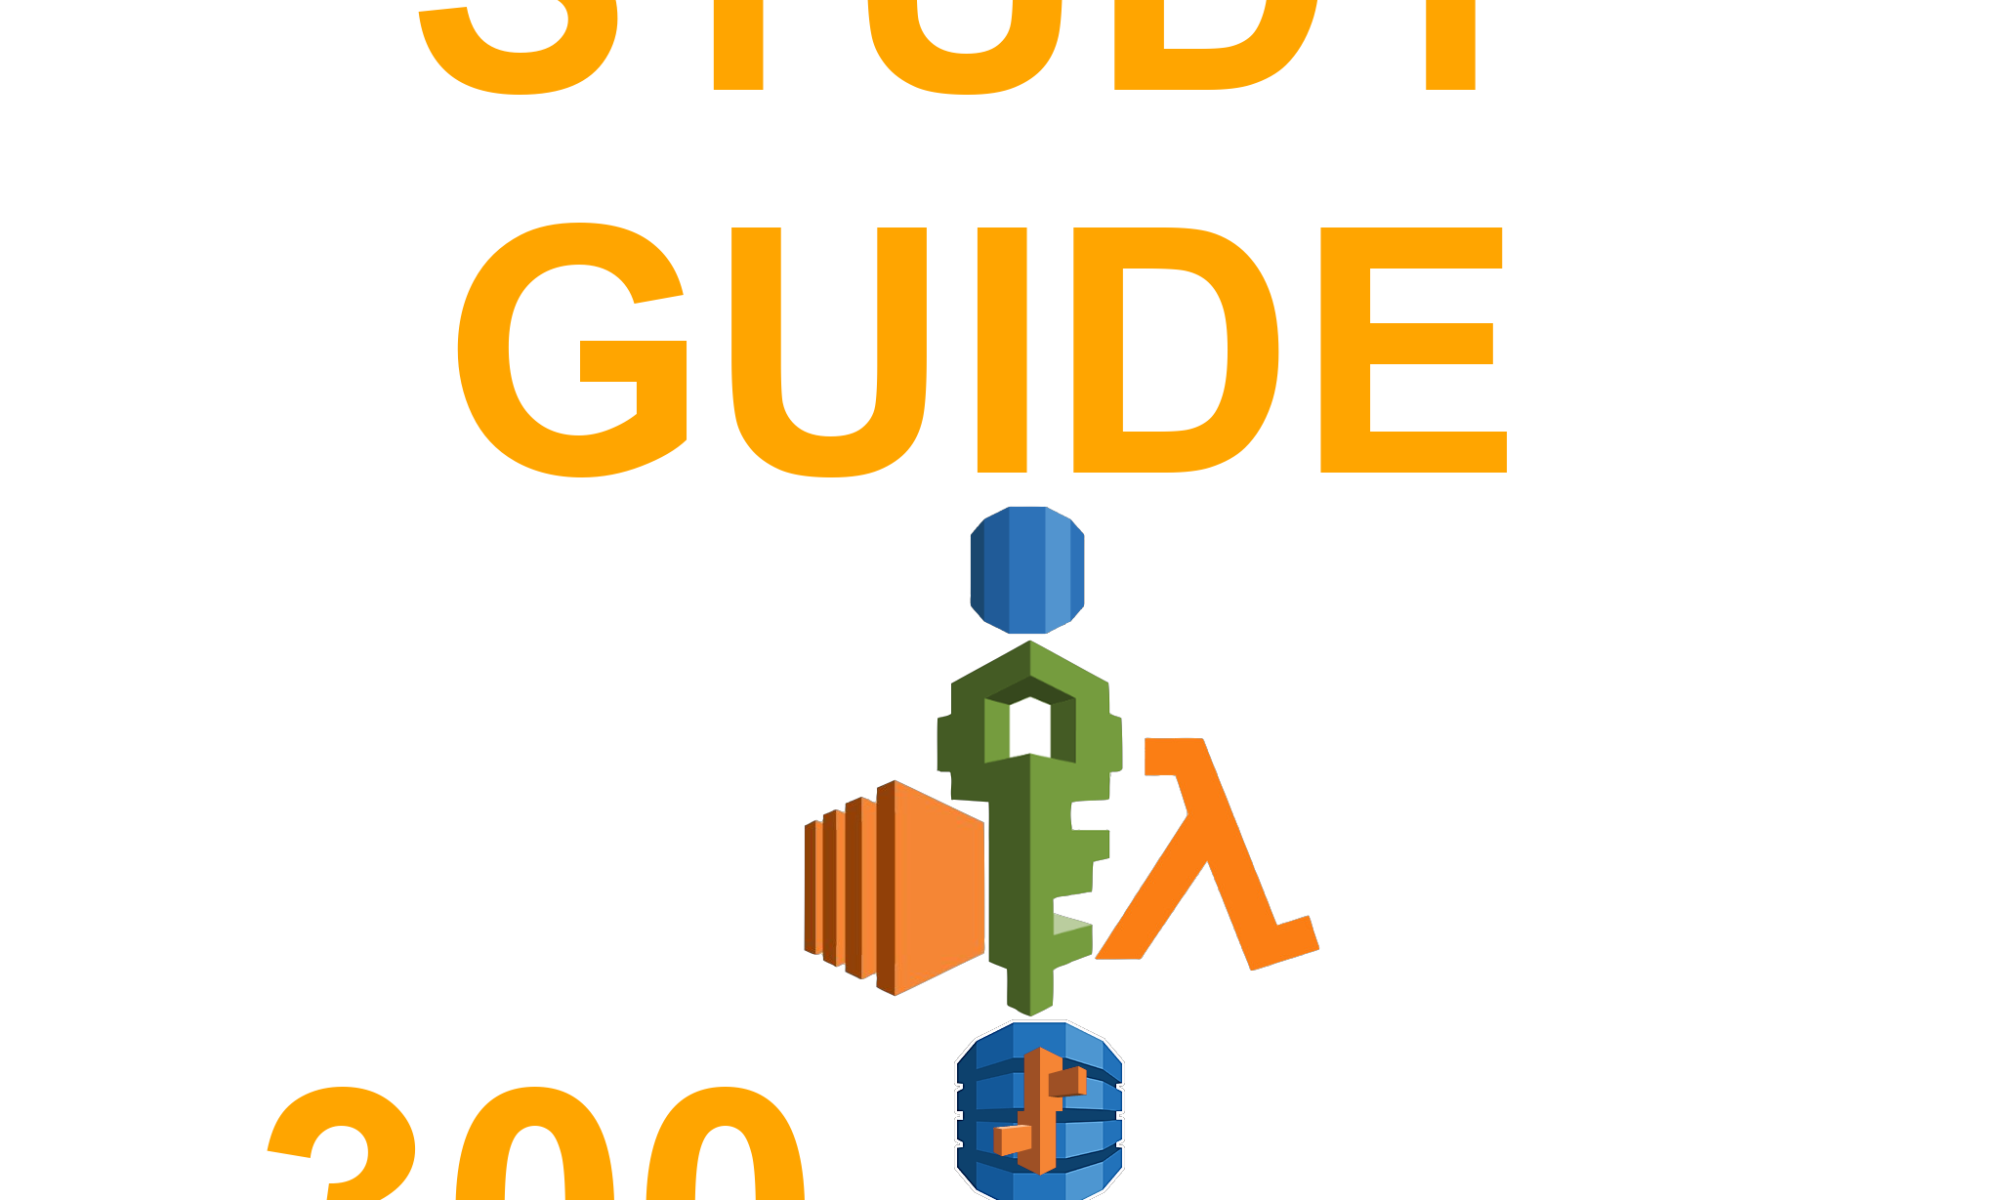 AWS Certified SysOps Administrator – Associate Study Guide and Tests Prep